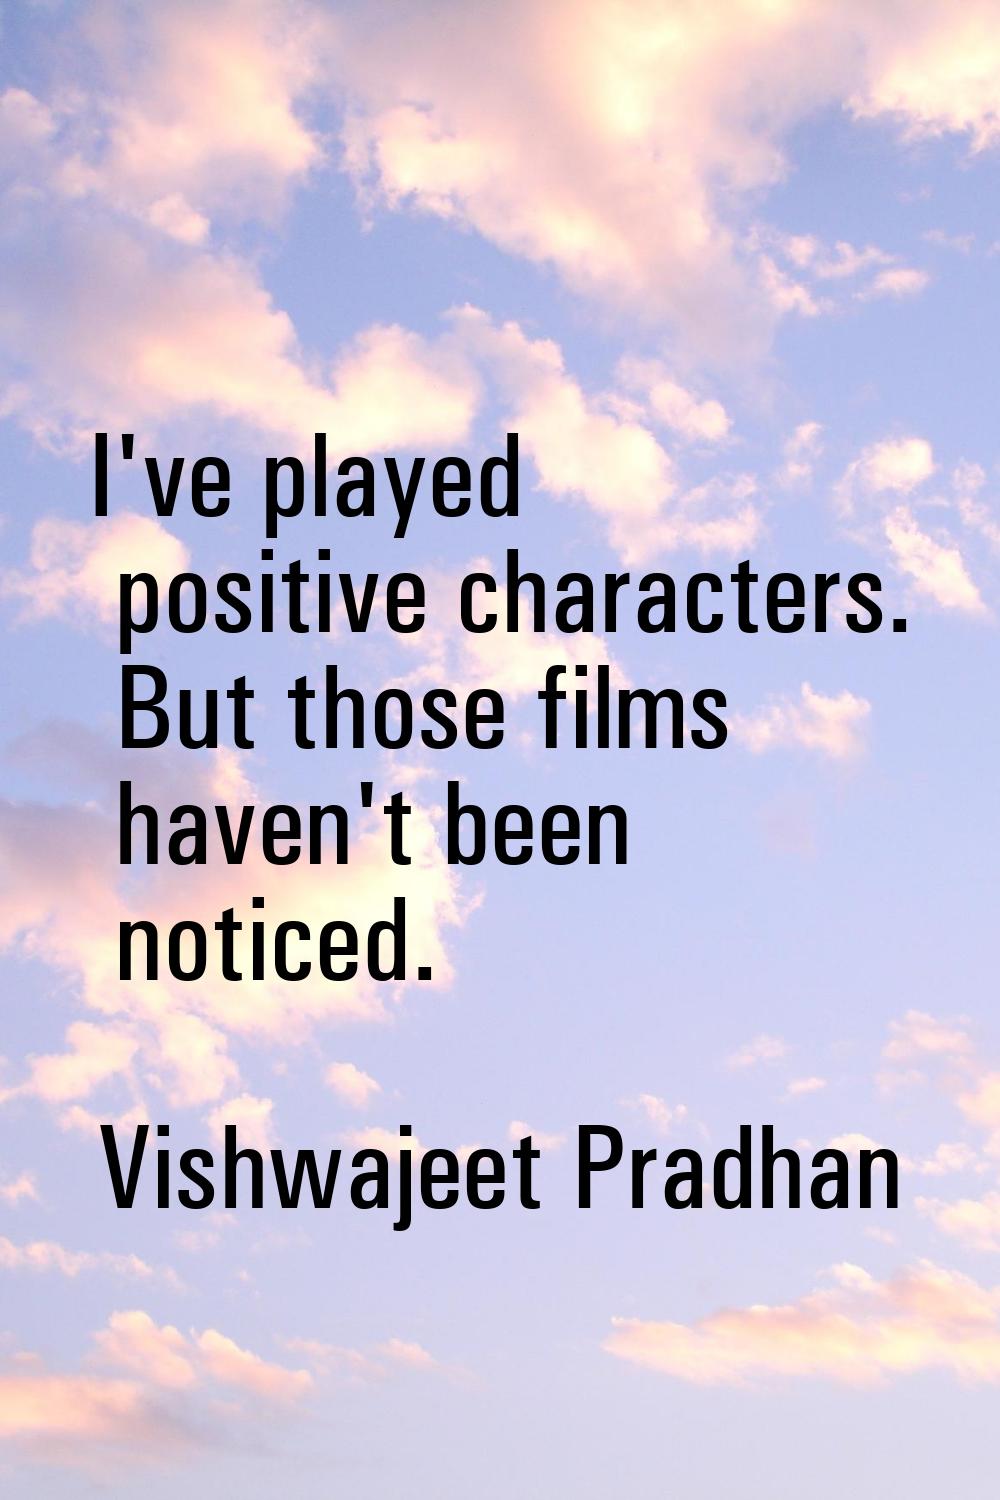 I've played positive characters. But those films haven't been noticed.